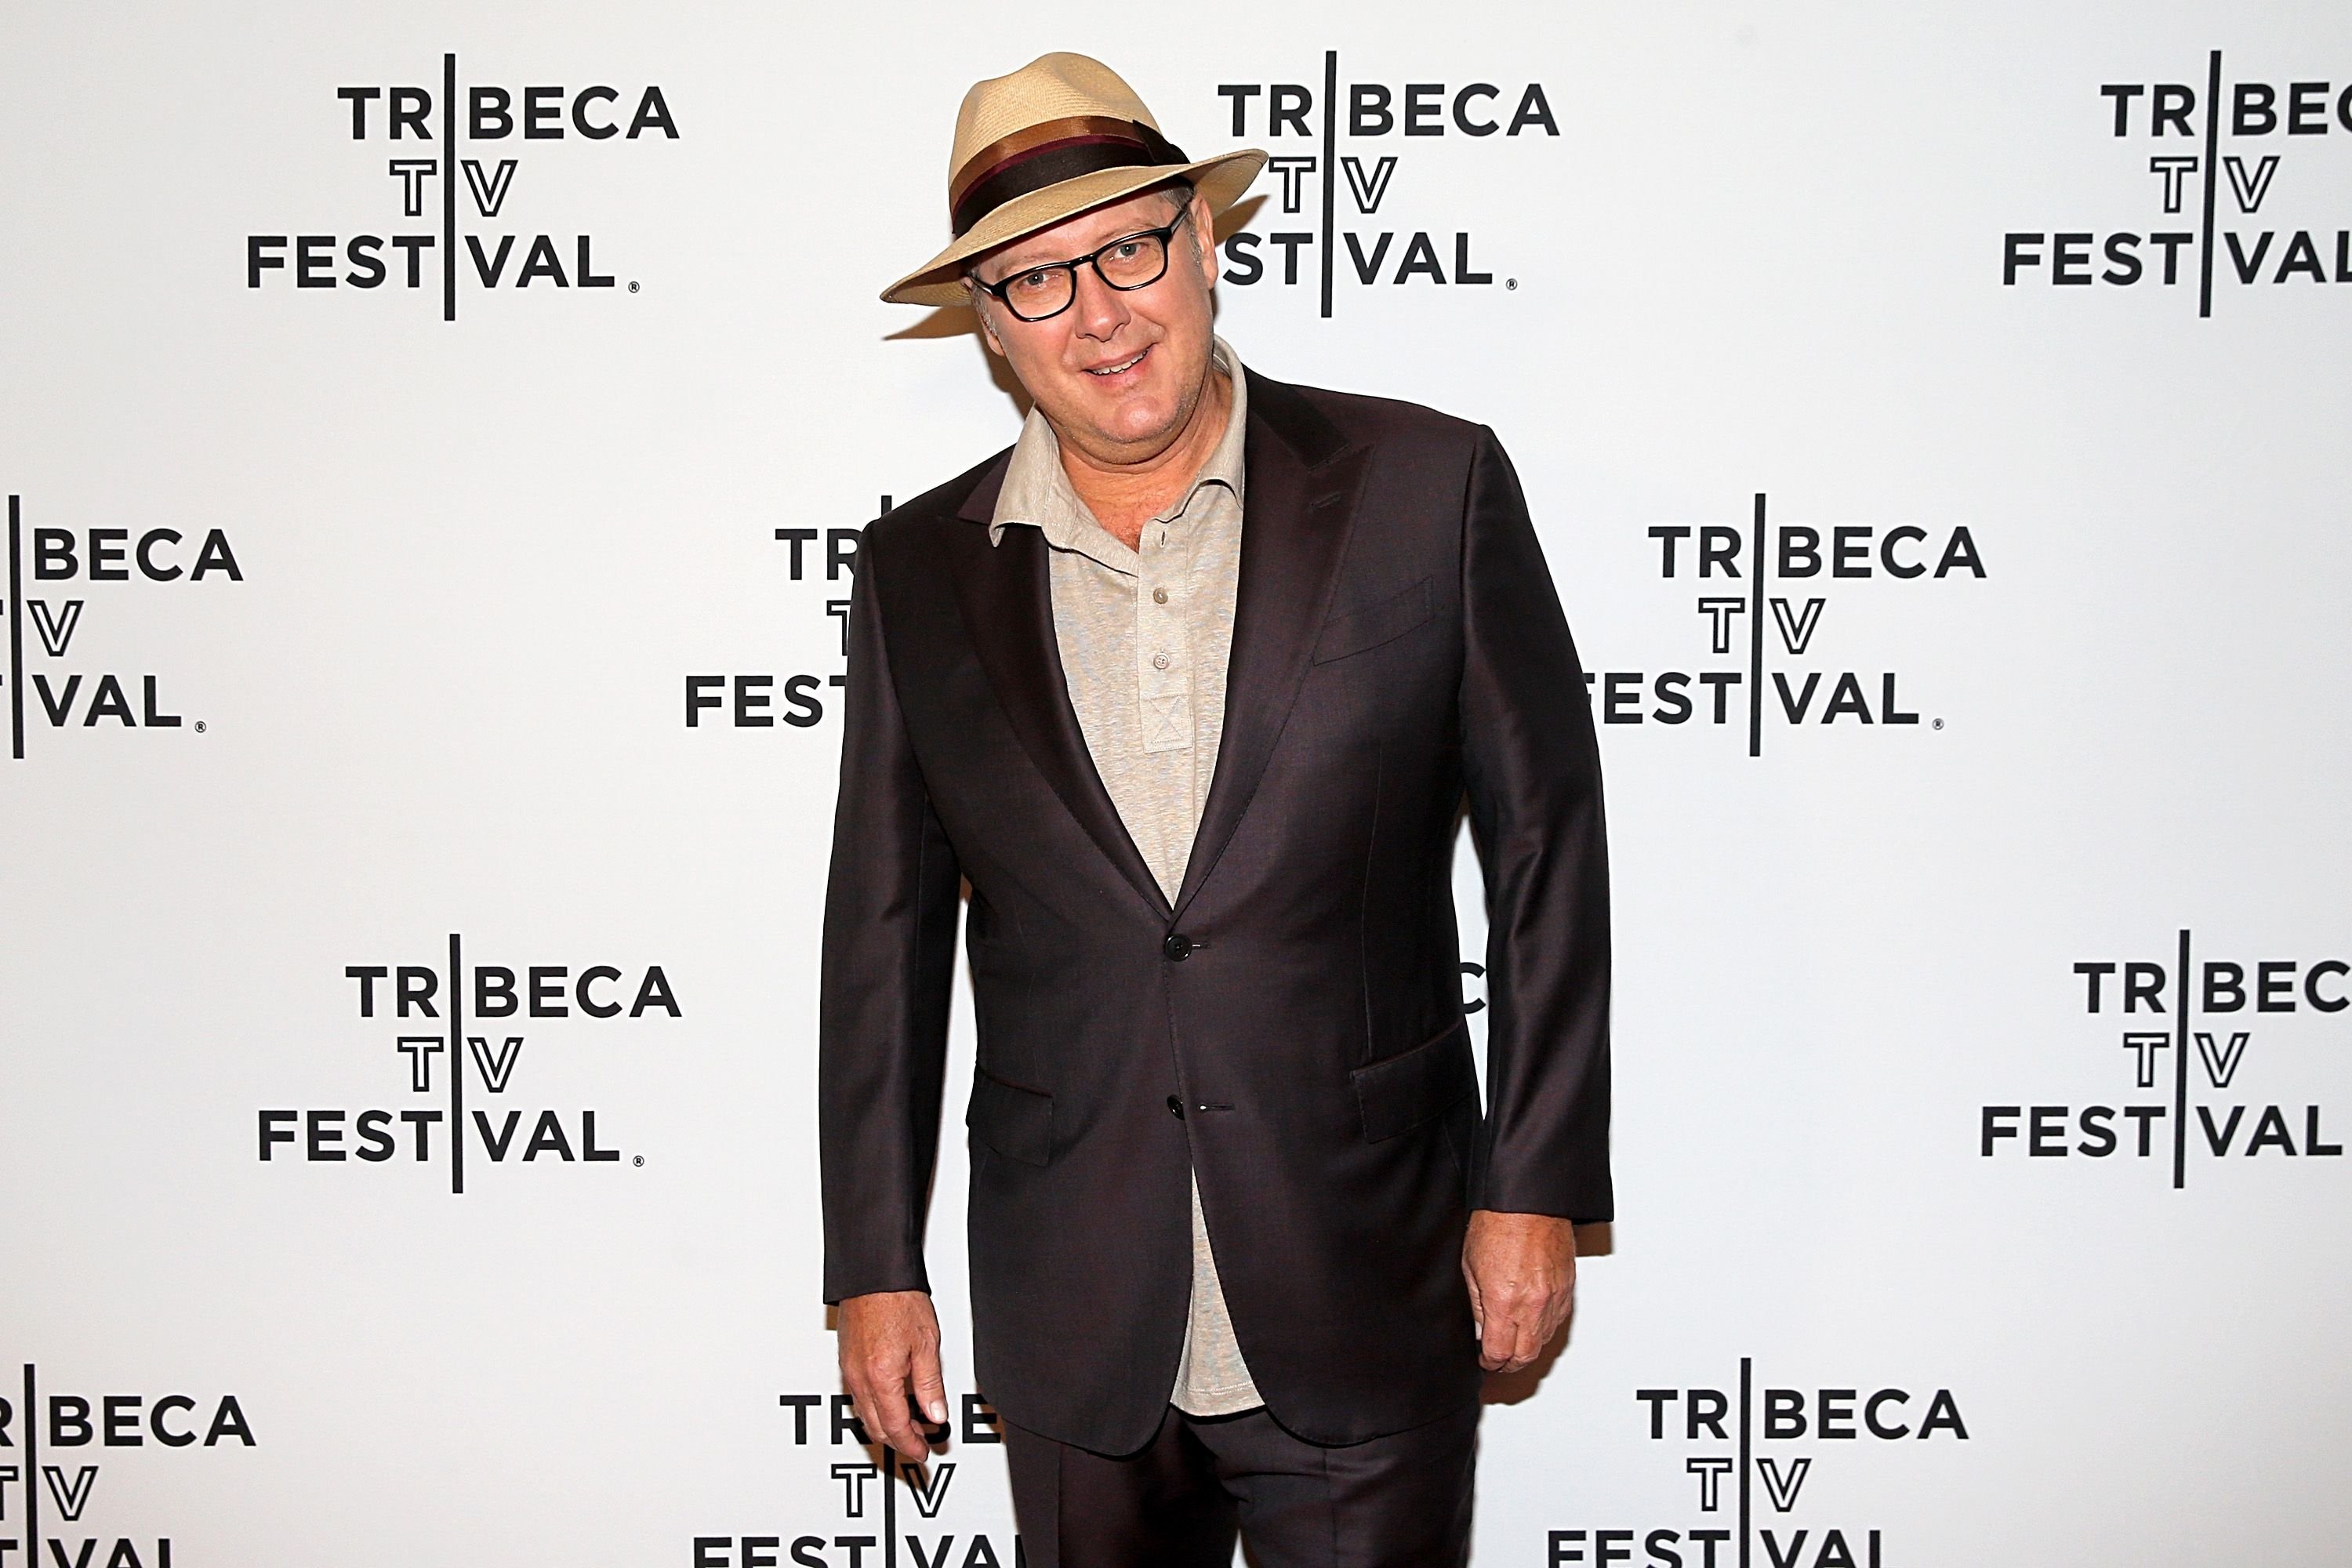 James Spader at the Tribeca TV Festival on September 12, 2019, in New York City | Photo: Dominik Bindl/Getty Images